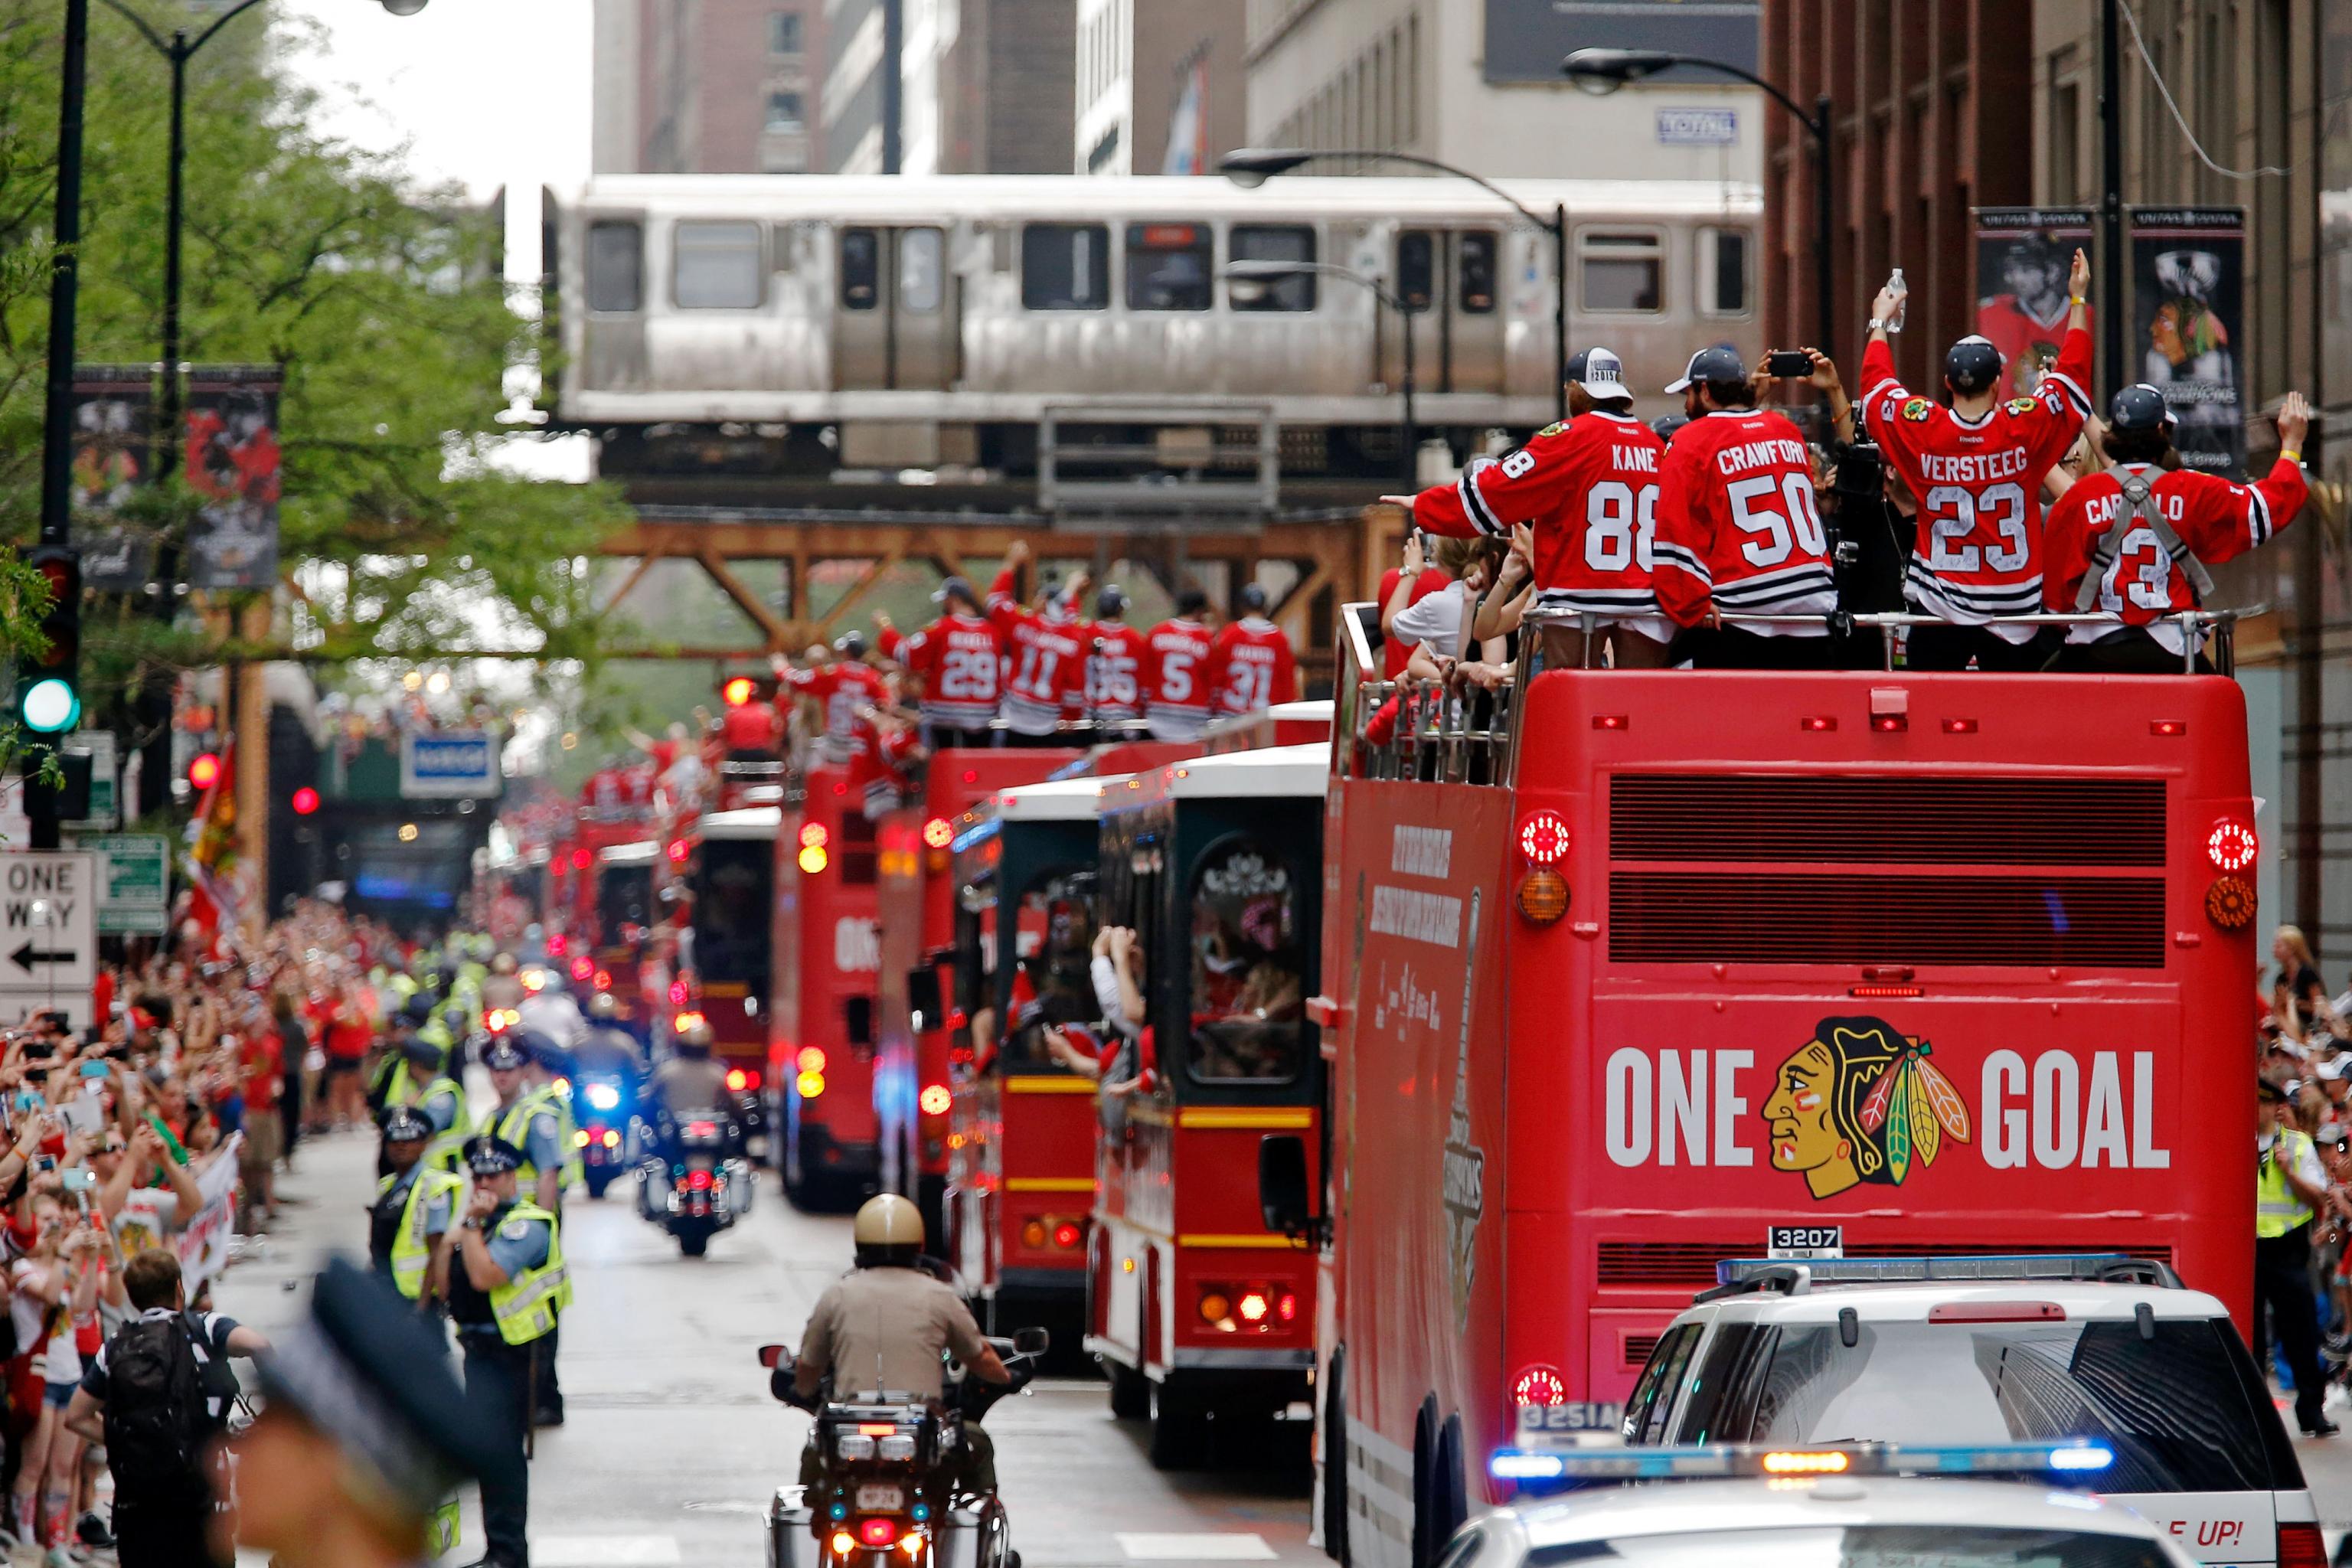 Photos: Blackhawks parade and rally in Chicago -- Chicago Tribune